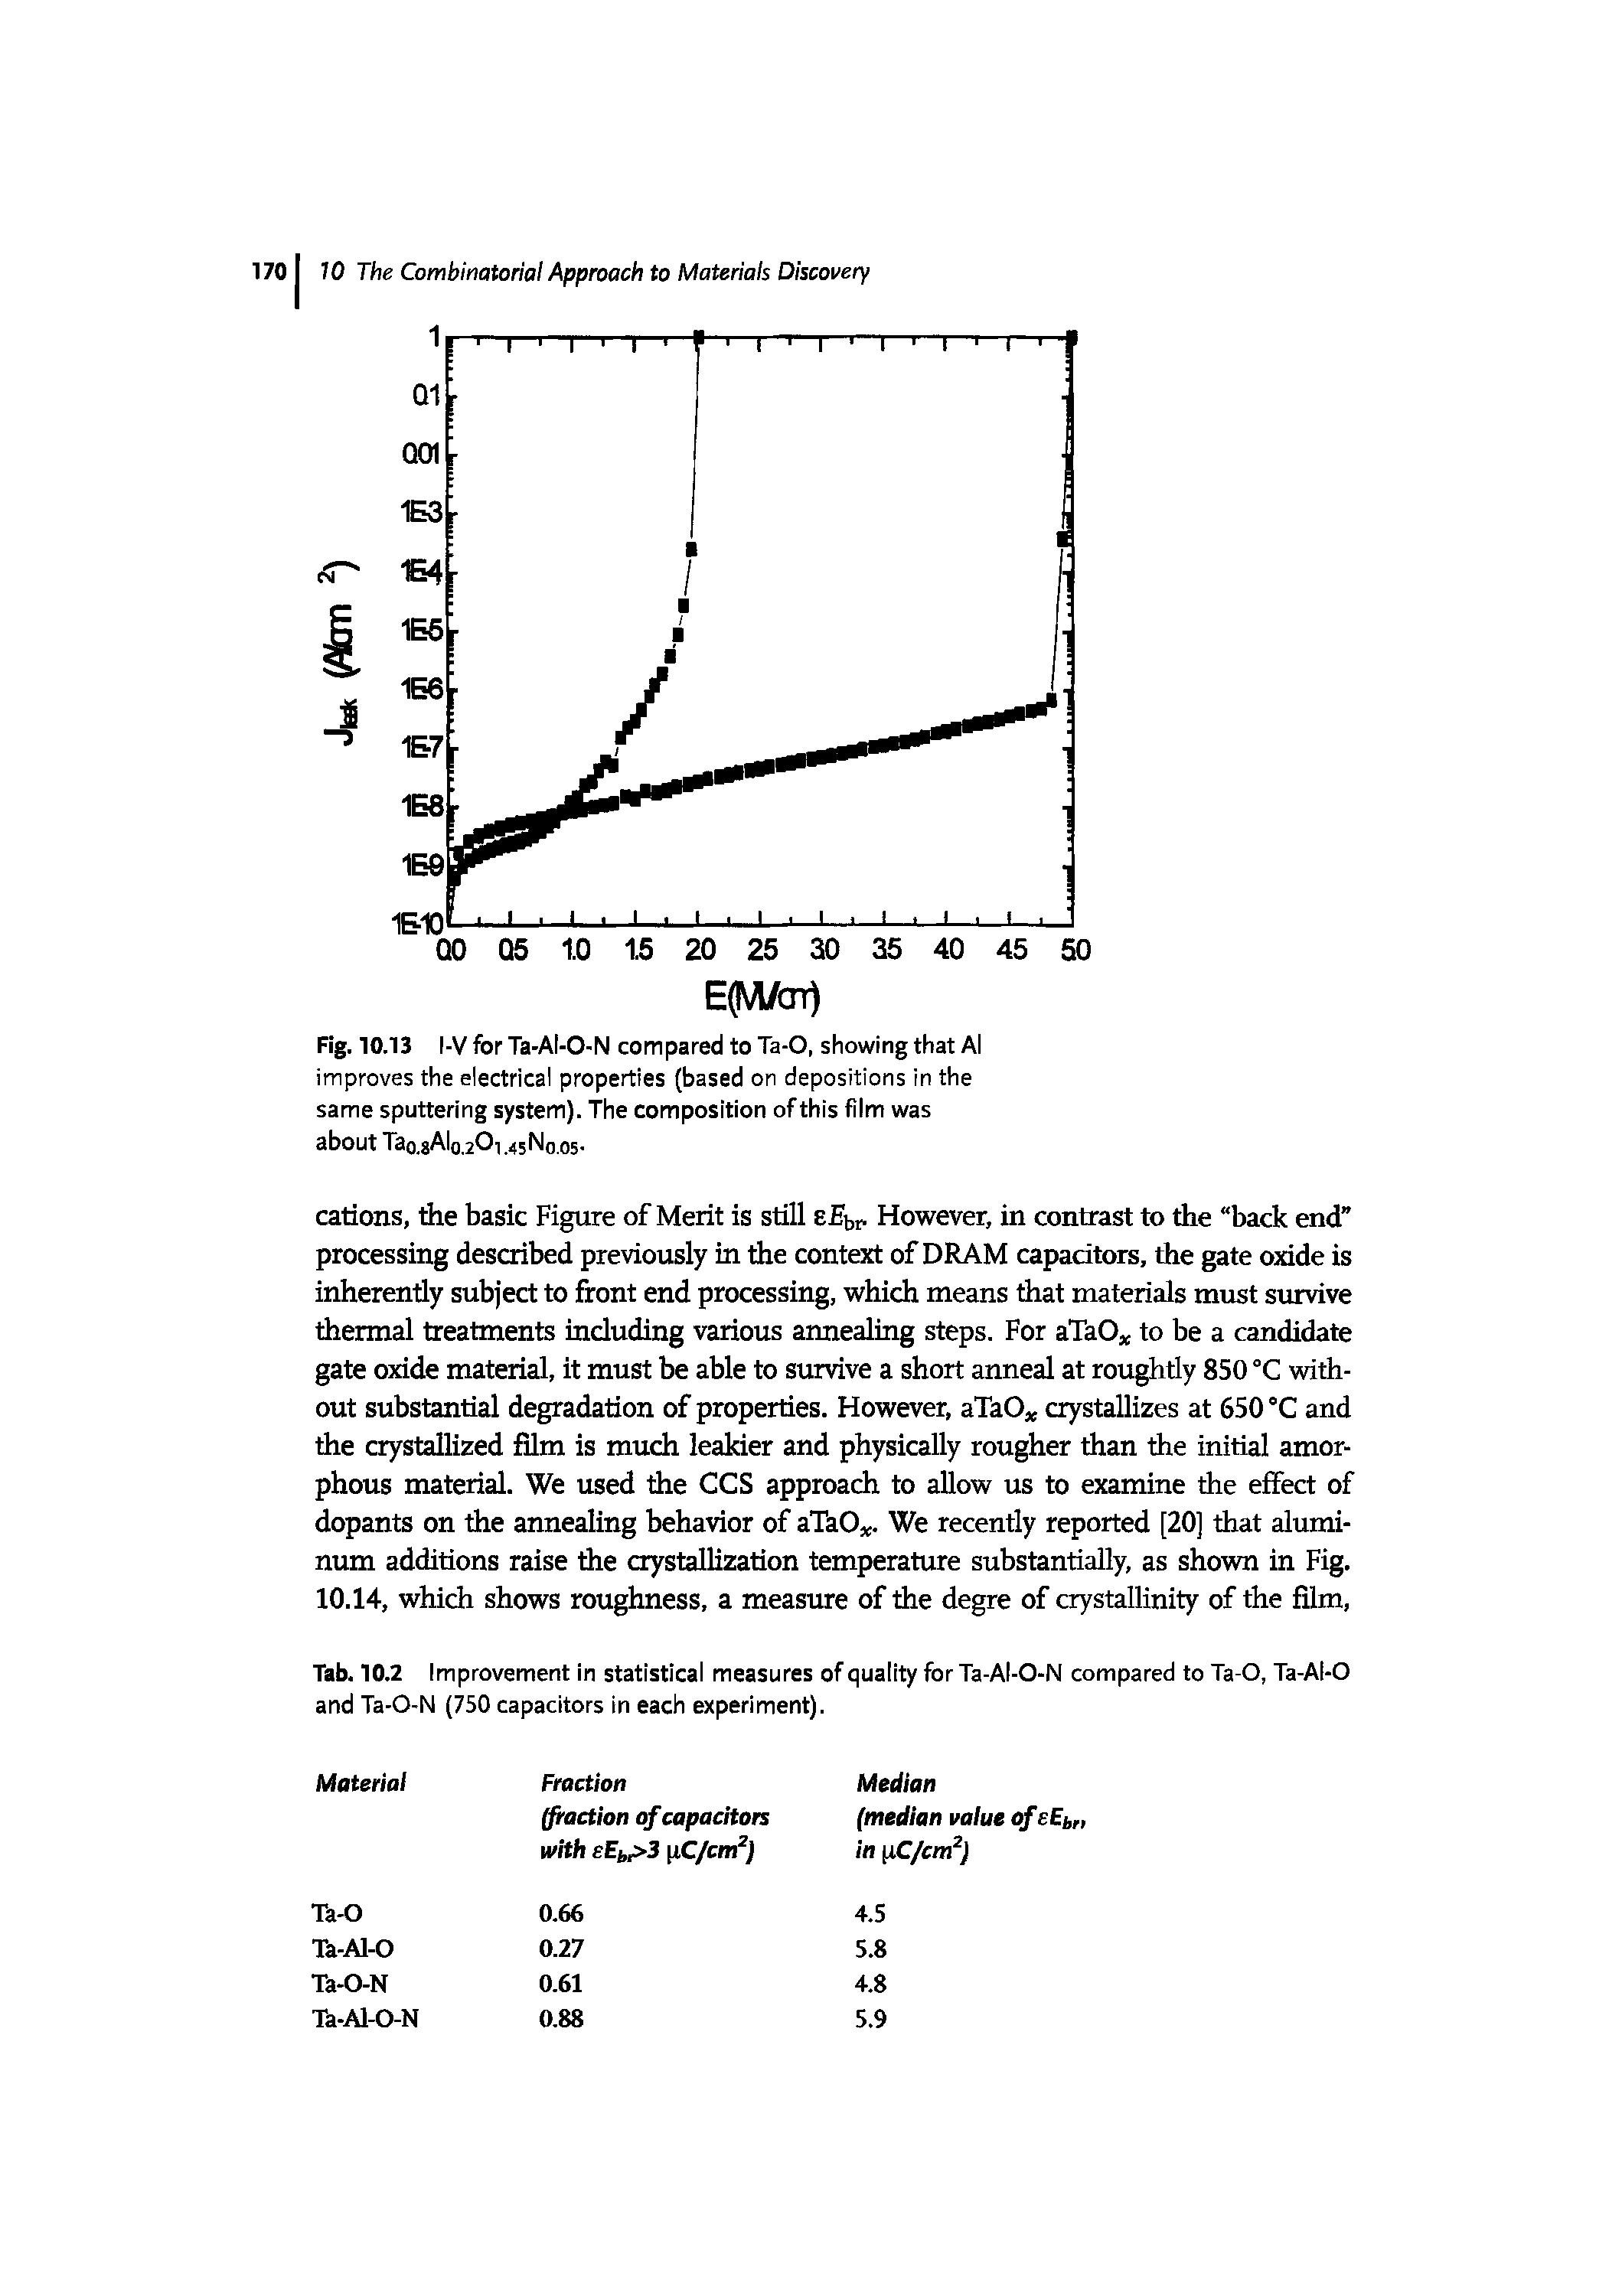 Tab. 10.2 Improvement in statistical measures of quality for Ta-AI-O-N compared to Ta-O, Ta-AI-O and Ta-O-N (750 capacitors in each experiment).